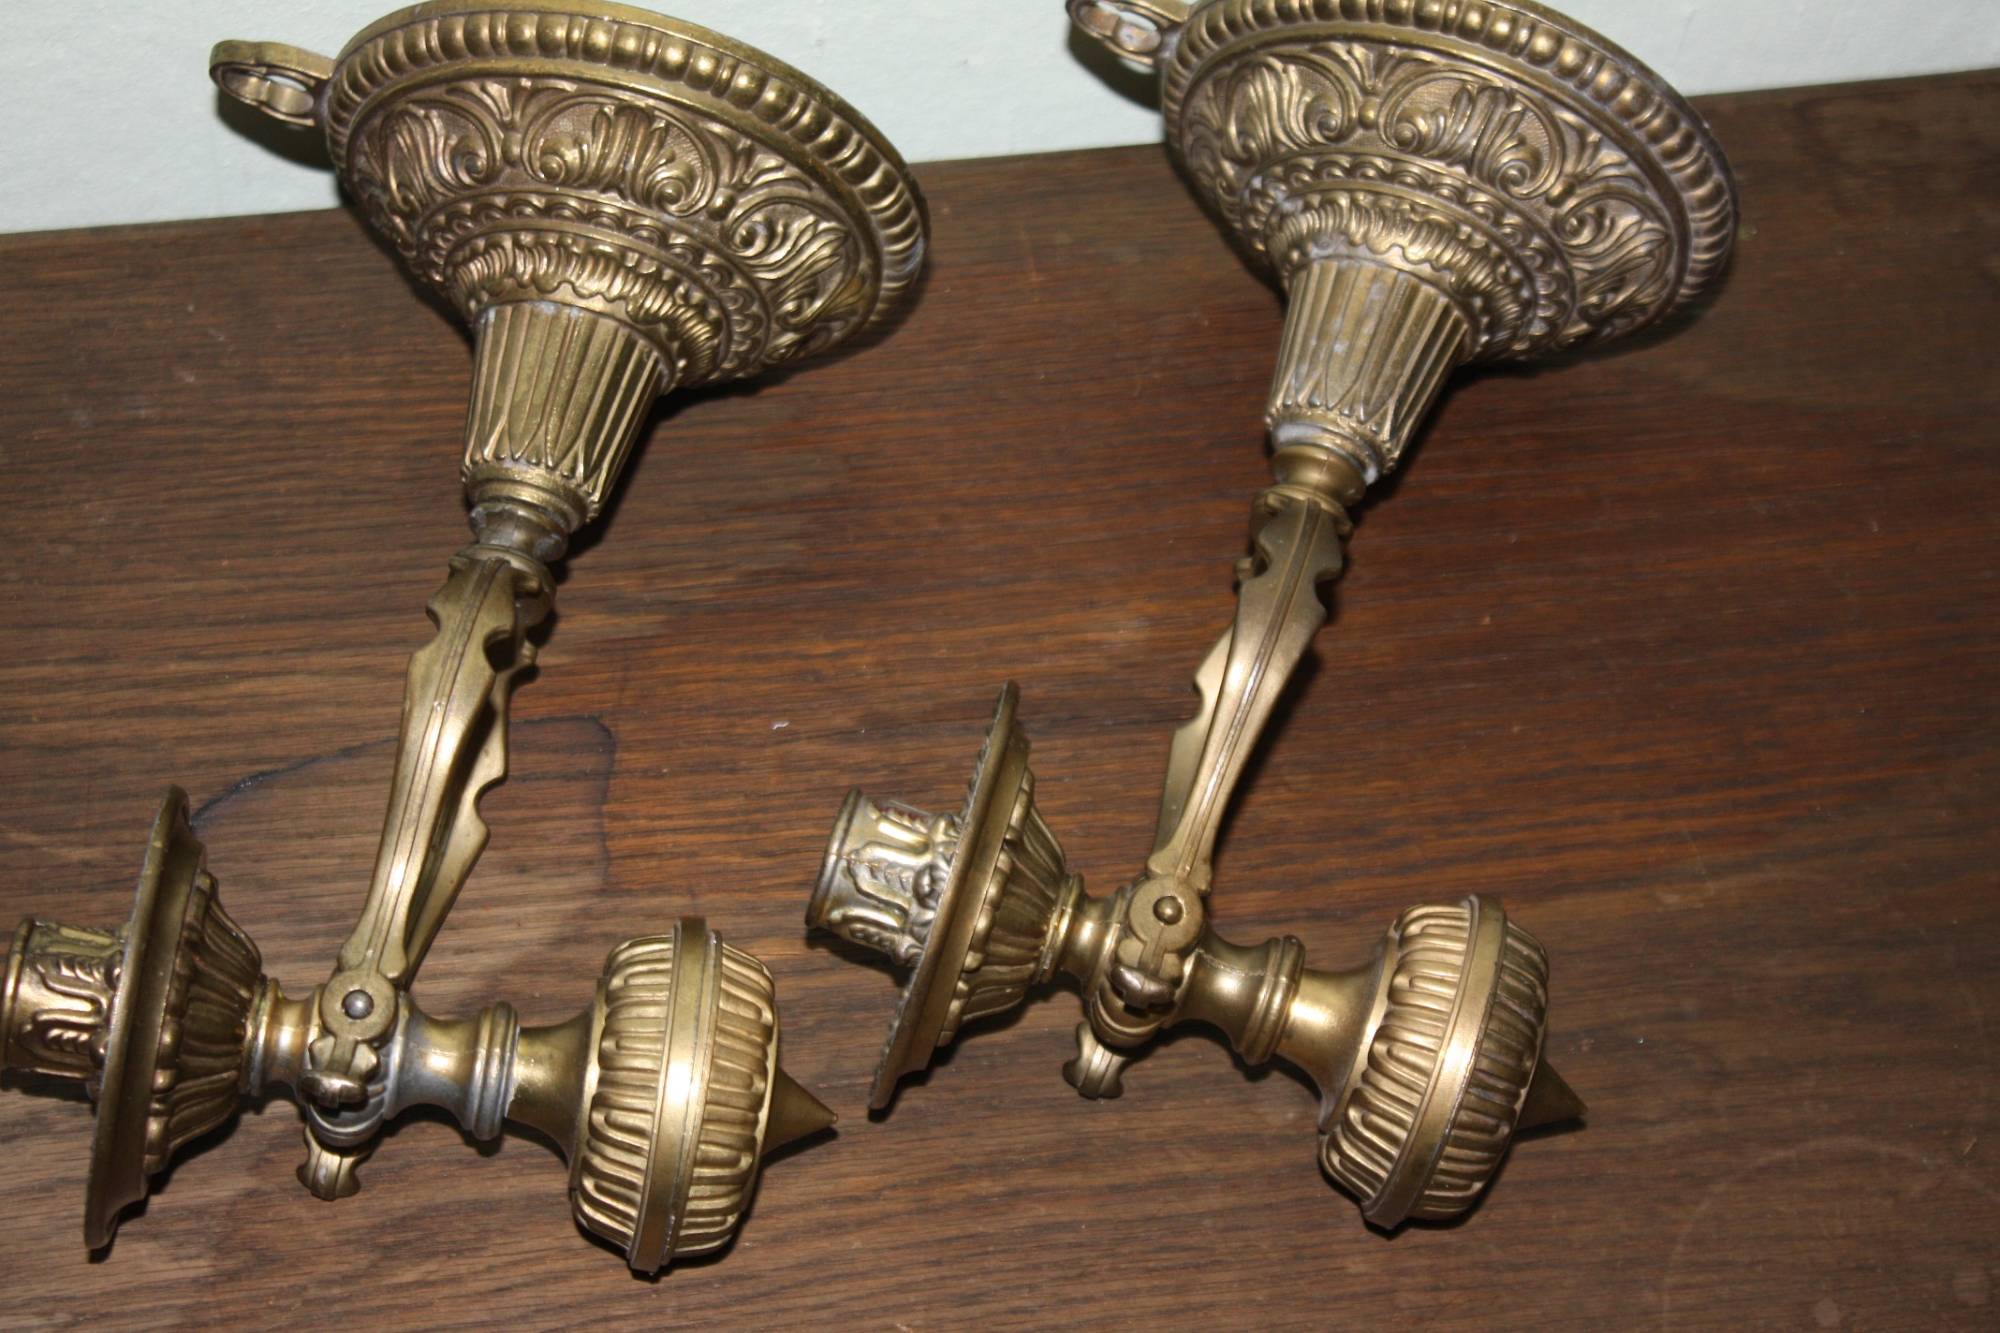 A pair of 20th century vintage brass traditional antique ship candle holders